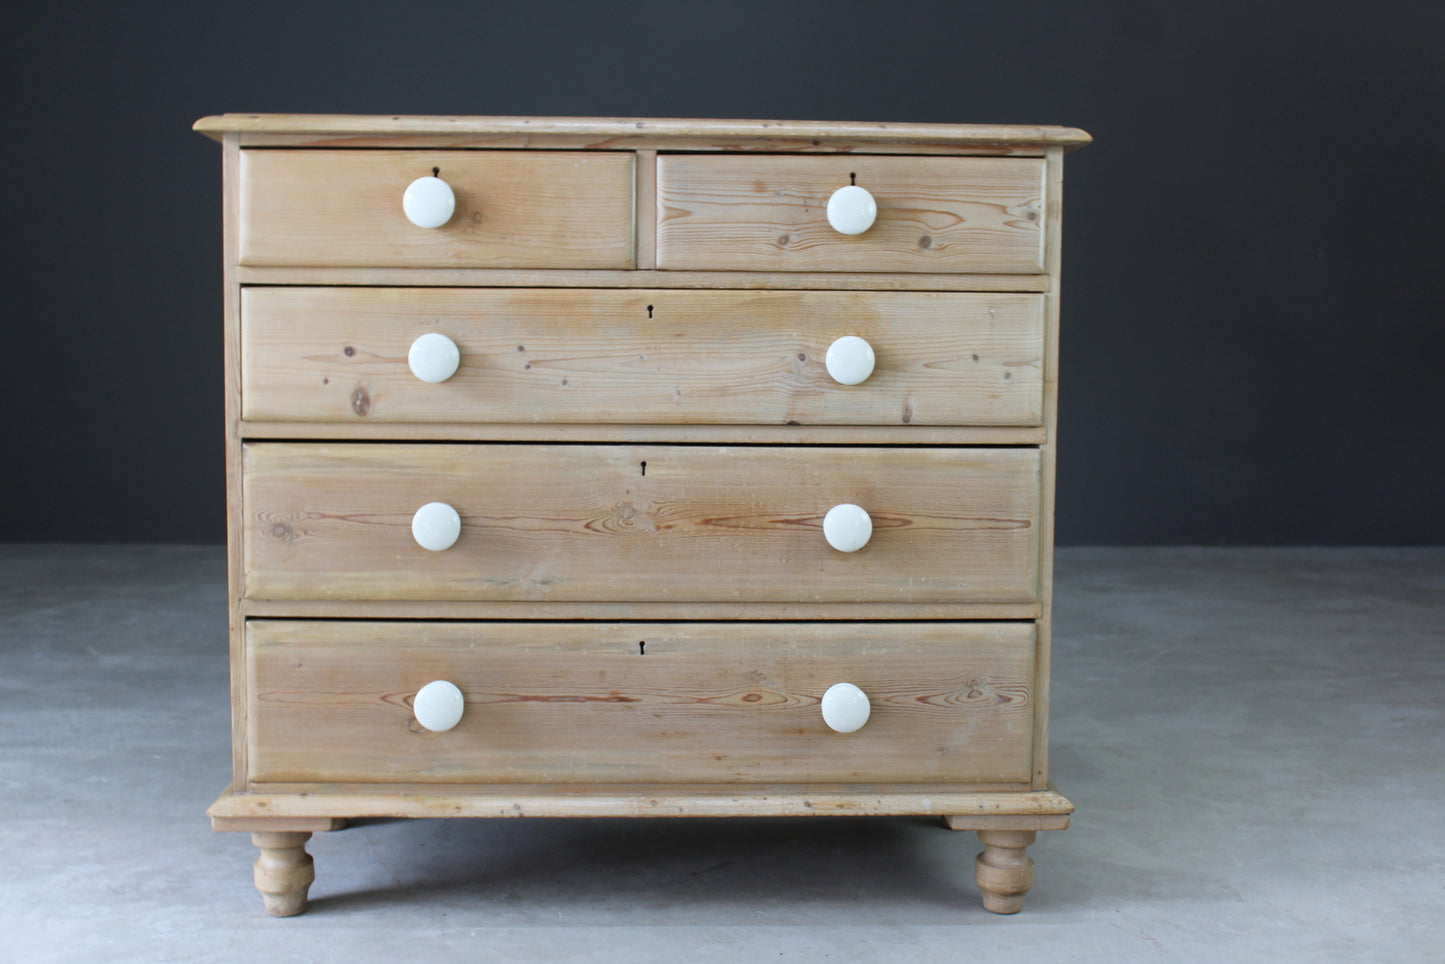 Stripped Pine Rustic Chest of Drawers - Kernow Furniture